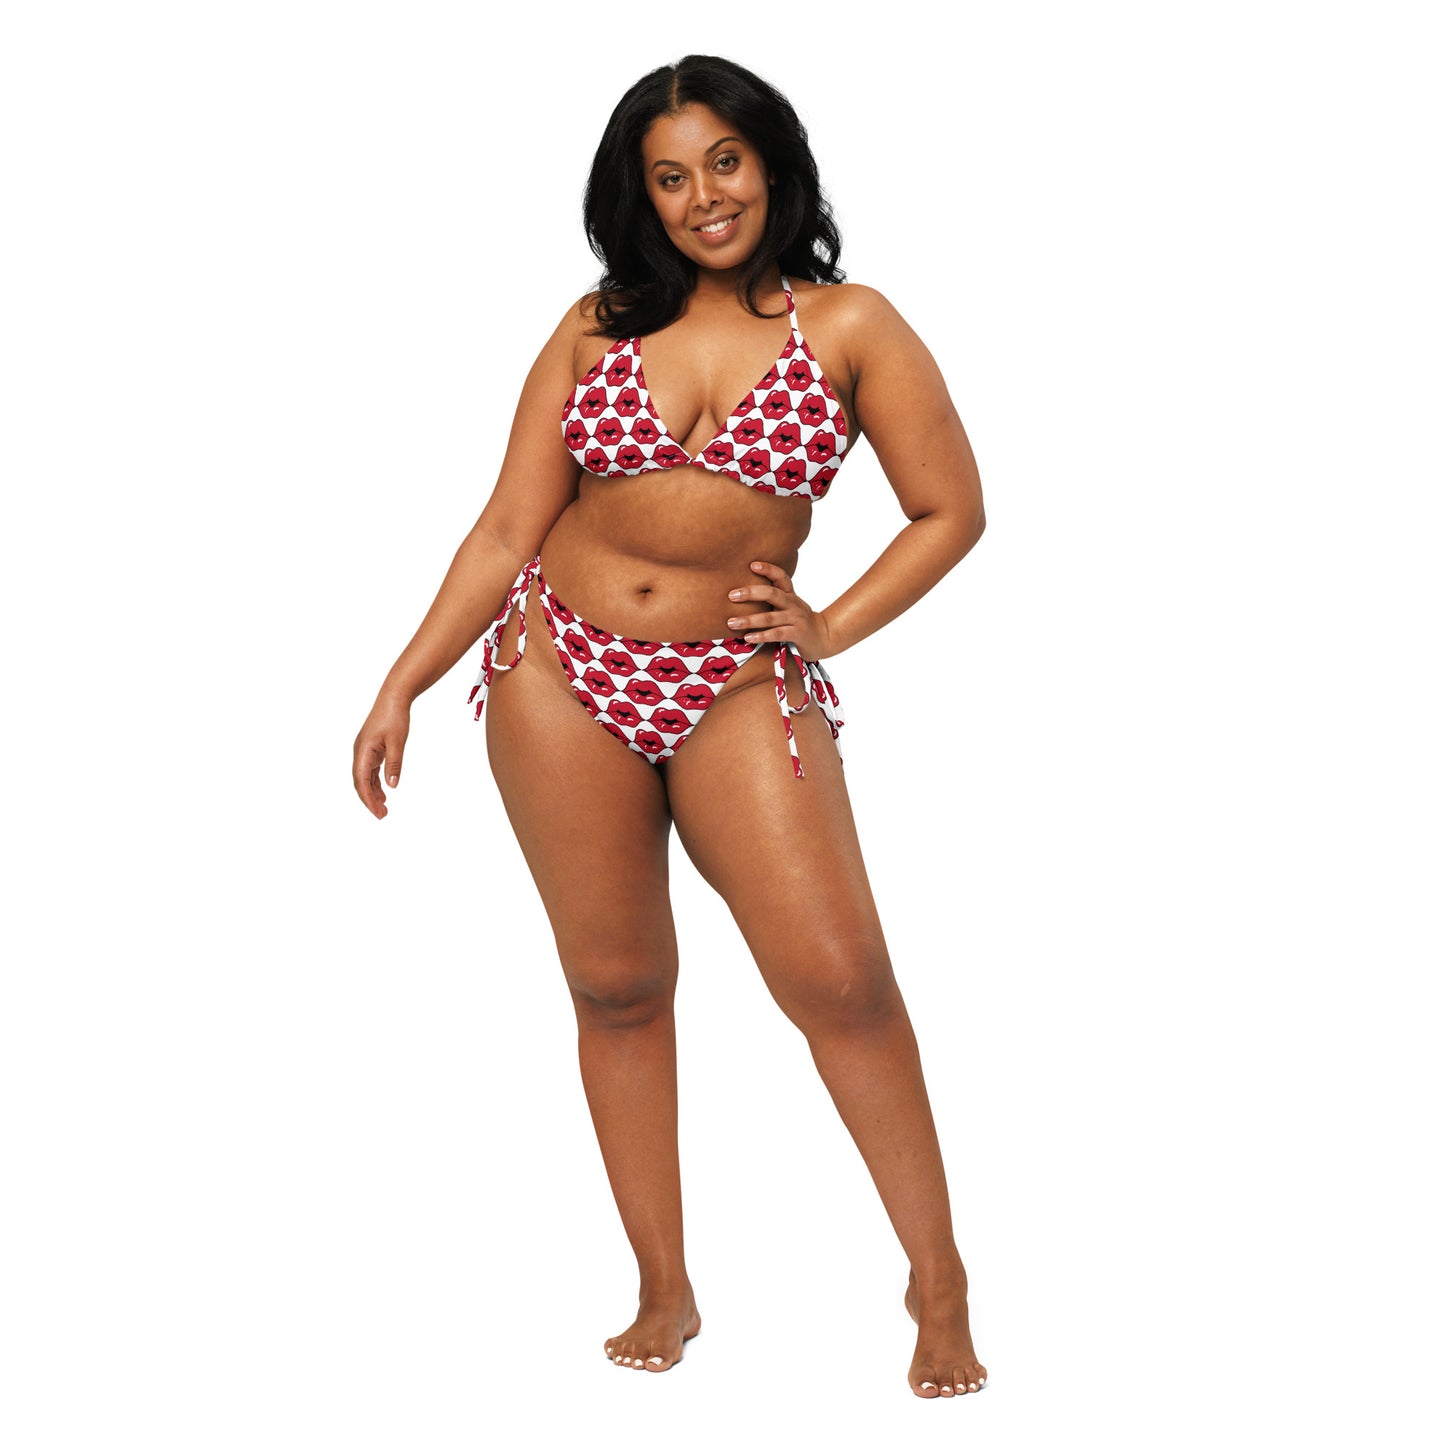 All-over print recycled string bikini, Red Lips Pattern outfit, bathing suits, Swimming Suits. Women's Swimwear